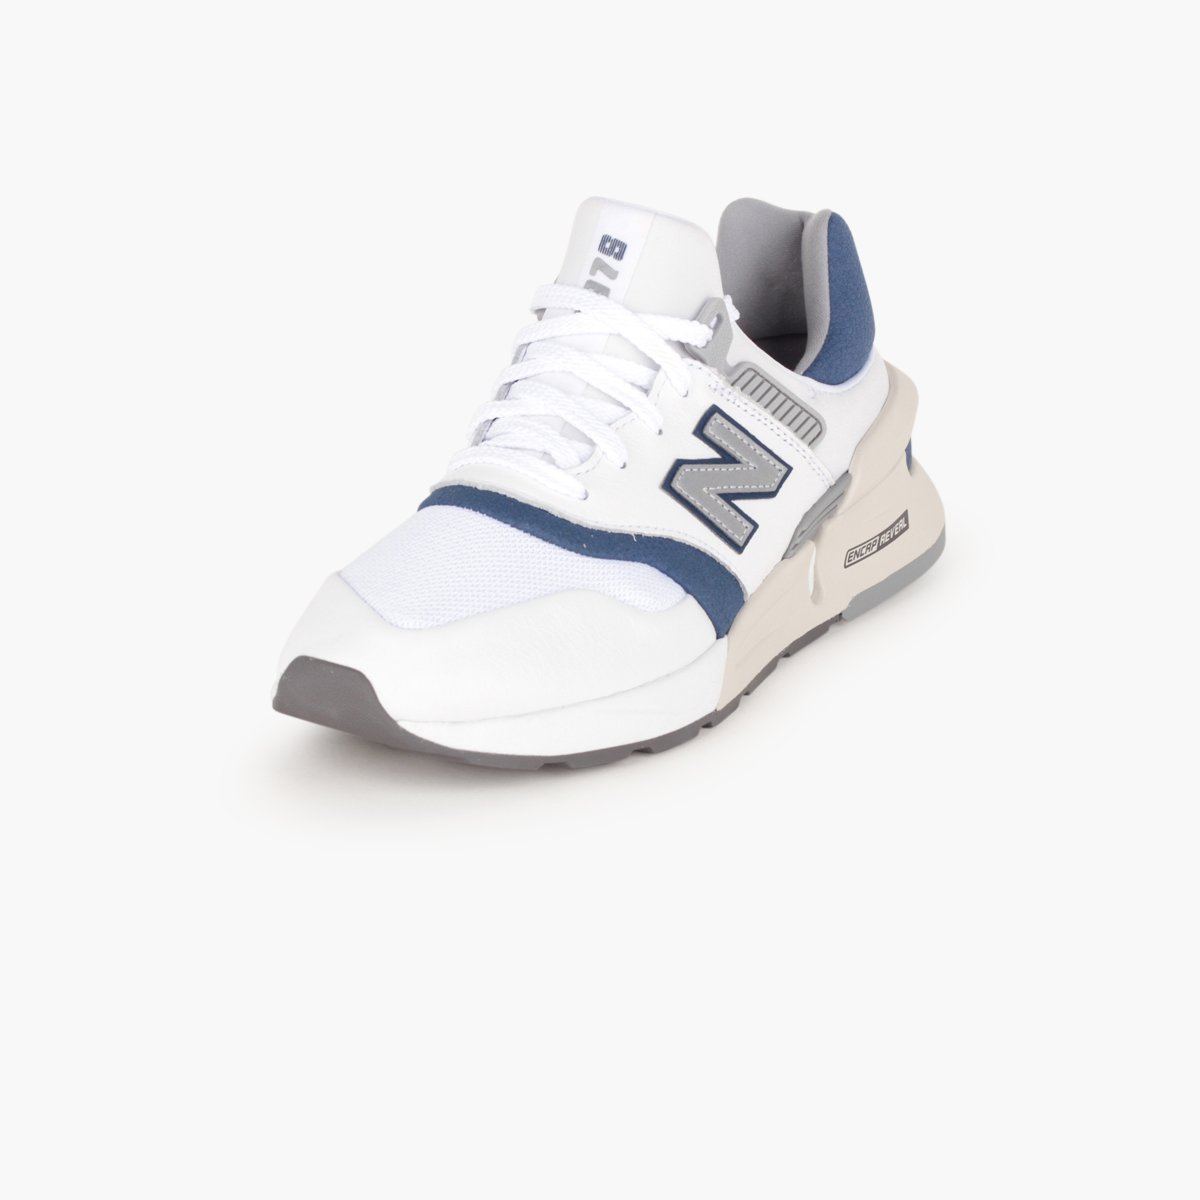 New Balance MS997HGD-SUEDE Store